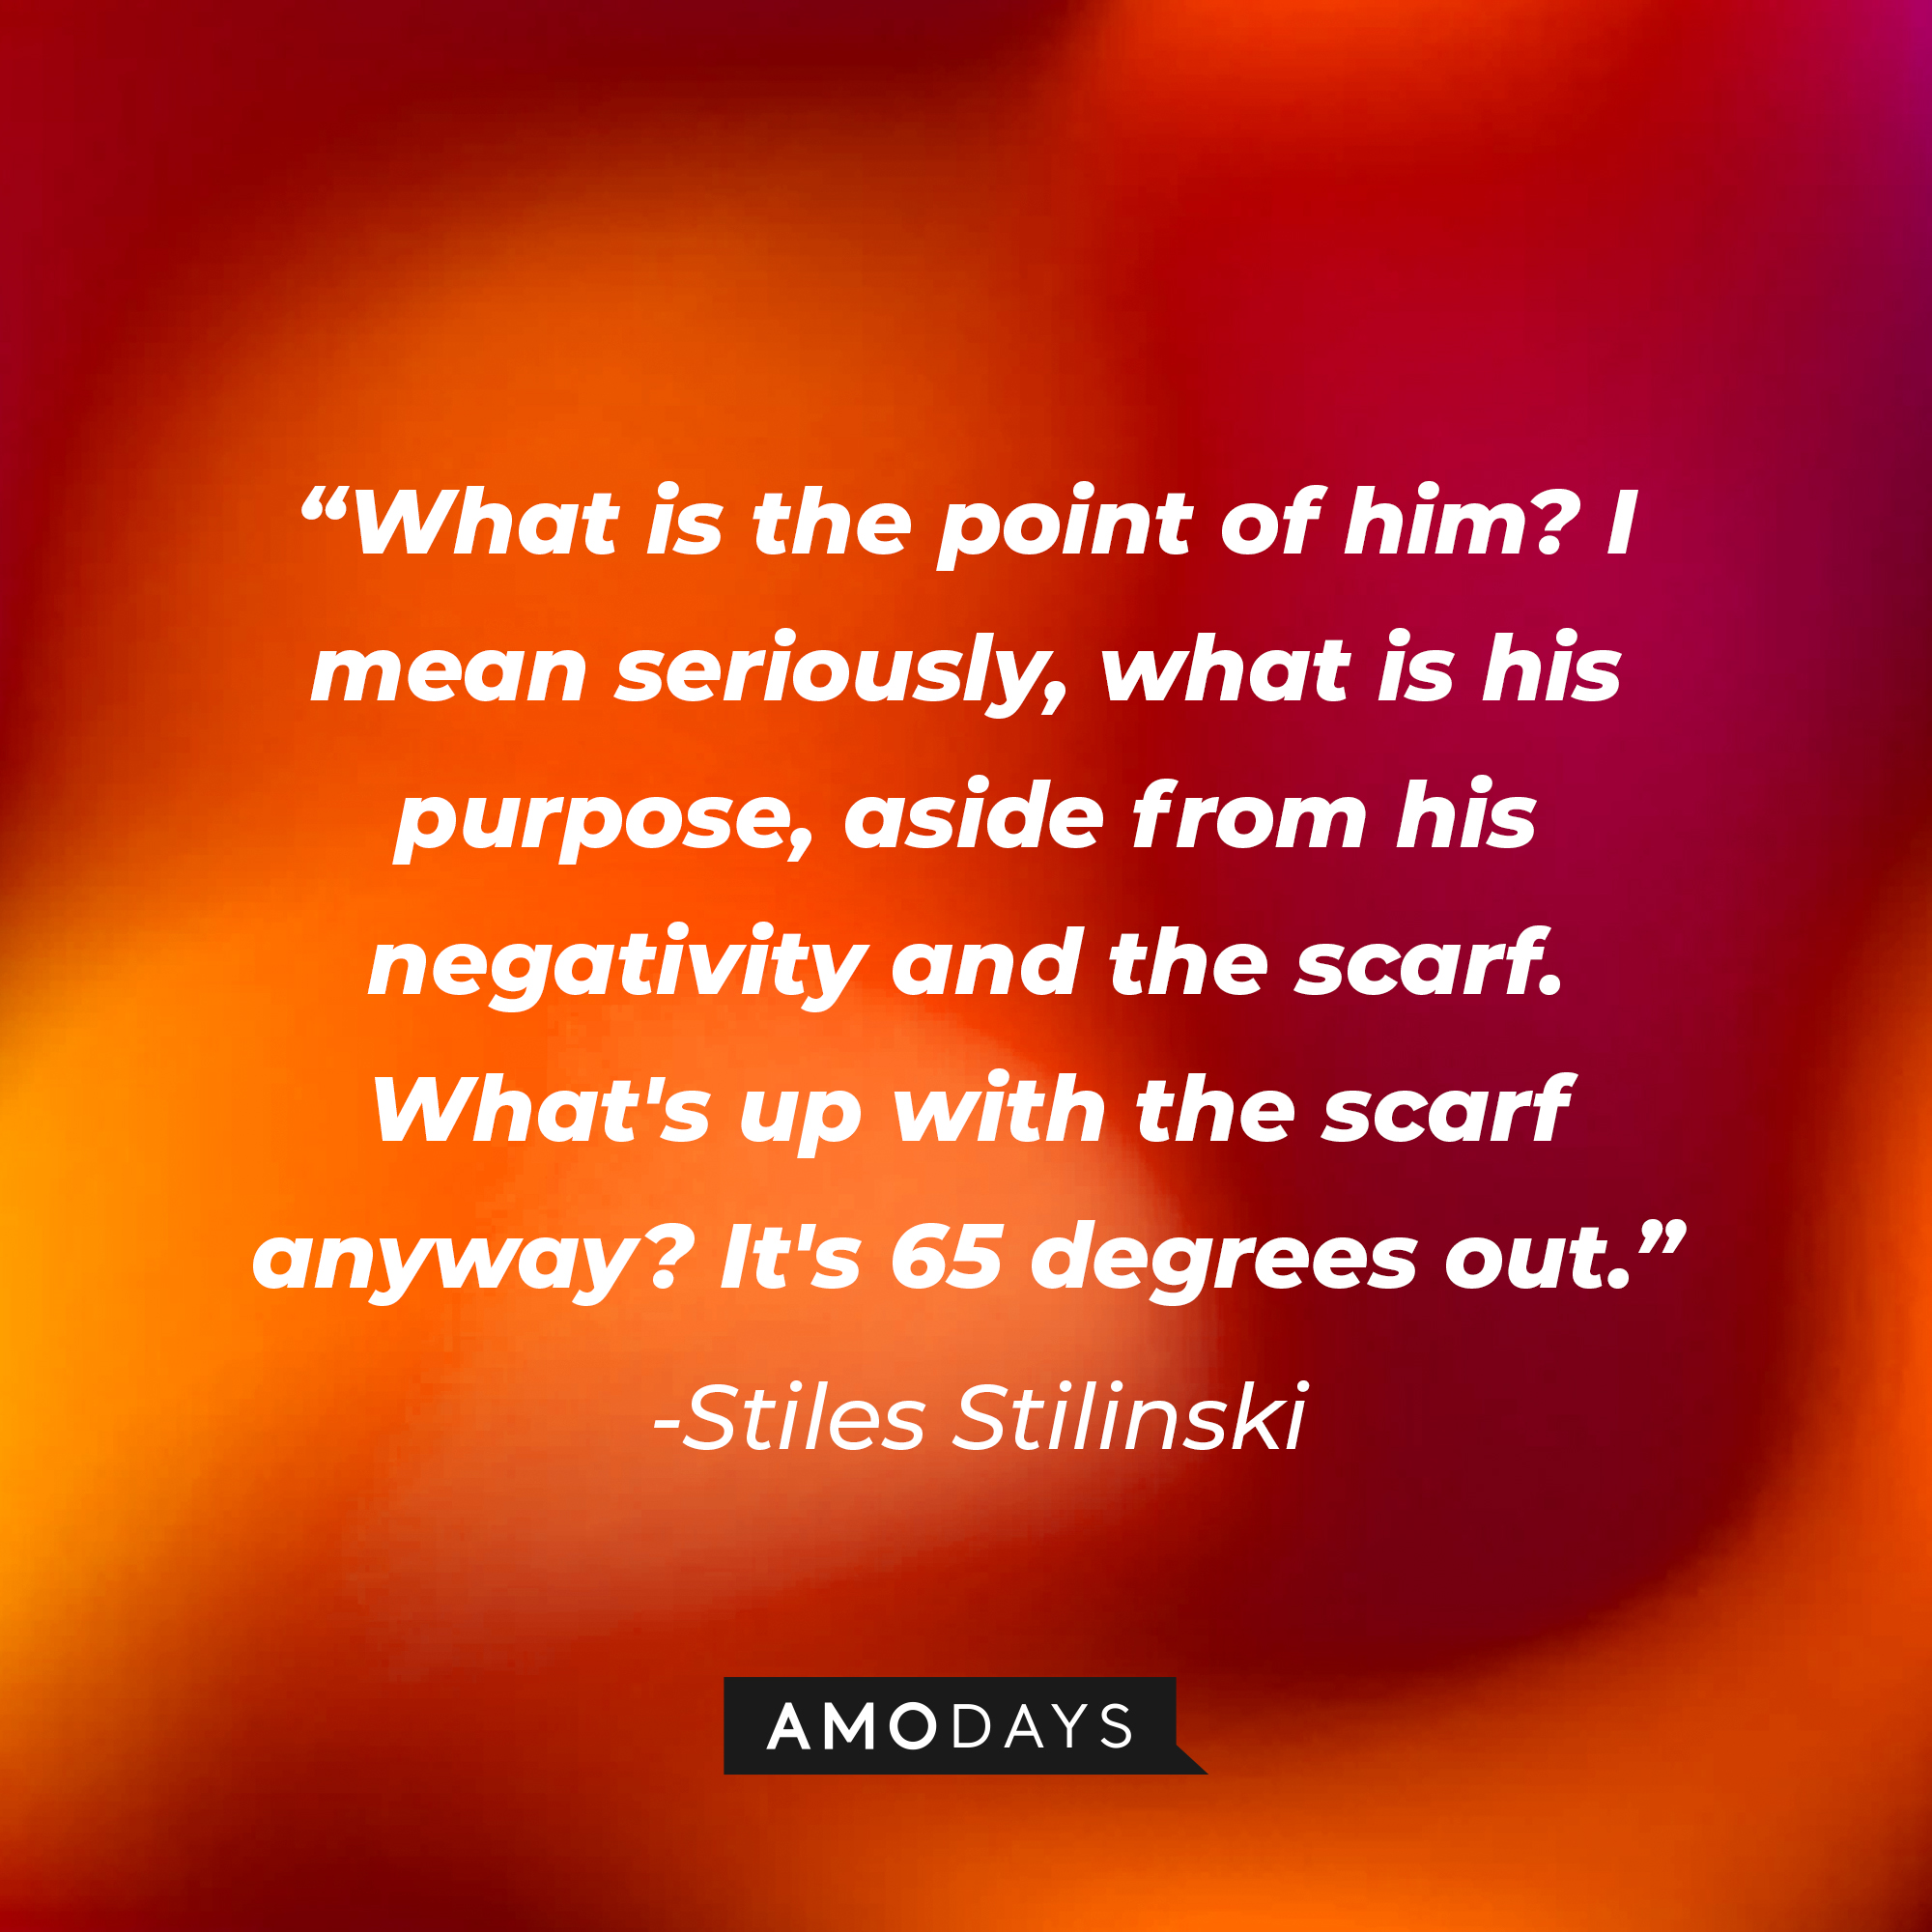 Stiles Stilinski's quote: "What is the point of him? I mean seriously, what is his purpose, aside from his negativity and the scarf. What's up with the scarf anyway? It's 65 degrees out." | Image: AmoDays